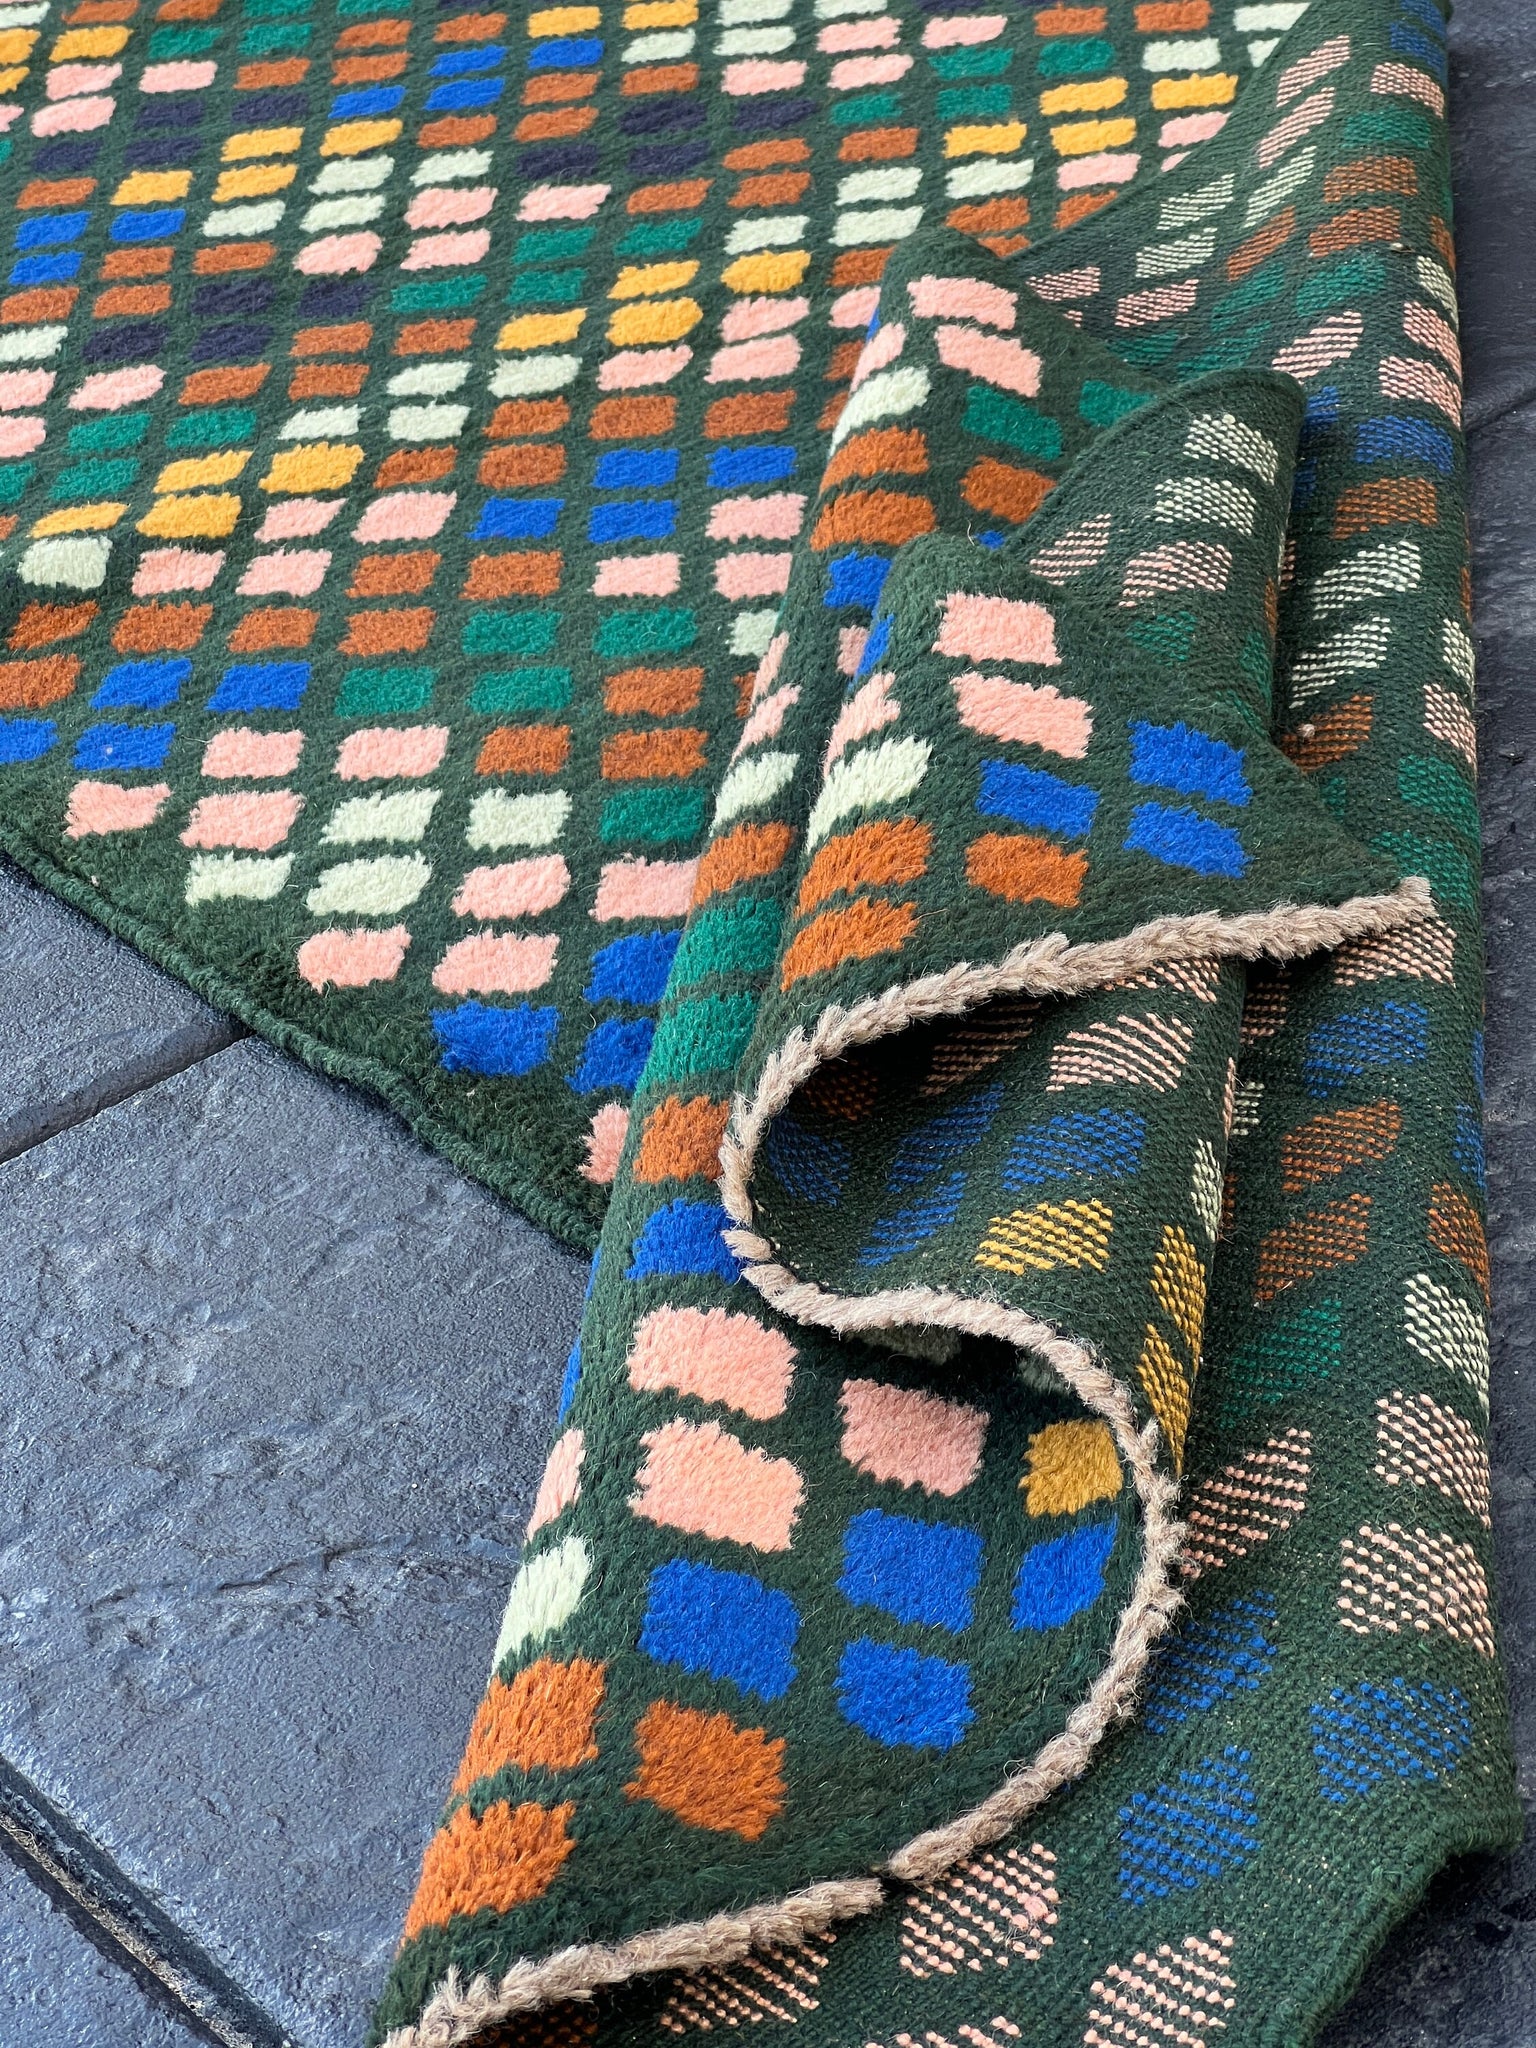 3x10 (90x305) Handmade Vintage Baluch Afghan Runner Rug | Olive Green Rose Pink Chocolate Brown Blush Pink Turquoise Blue Teal Wool